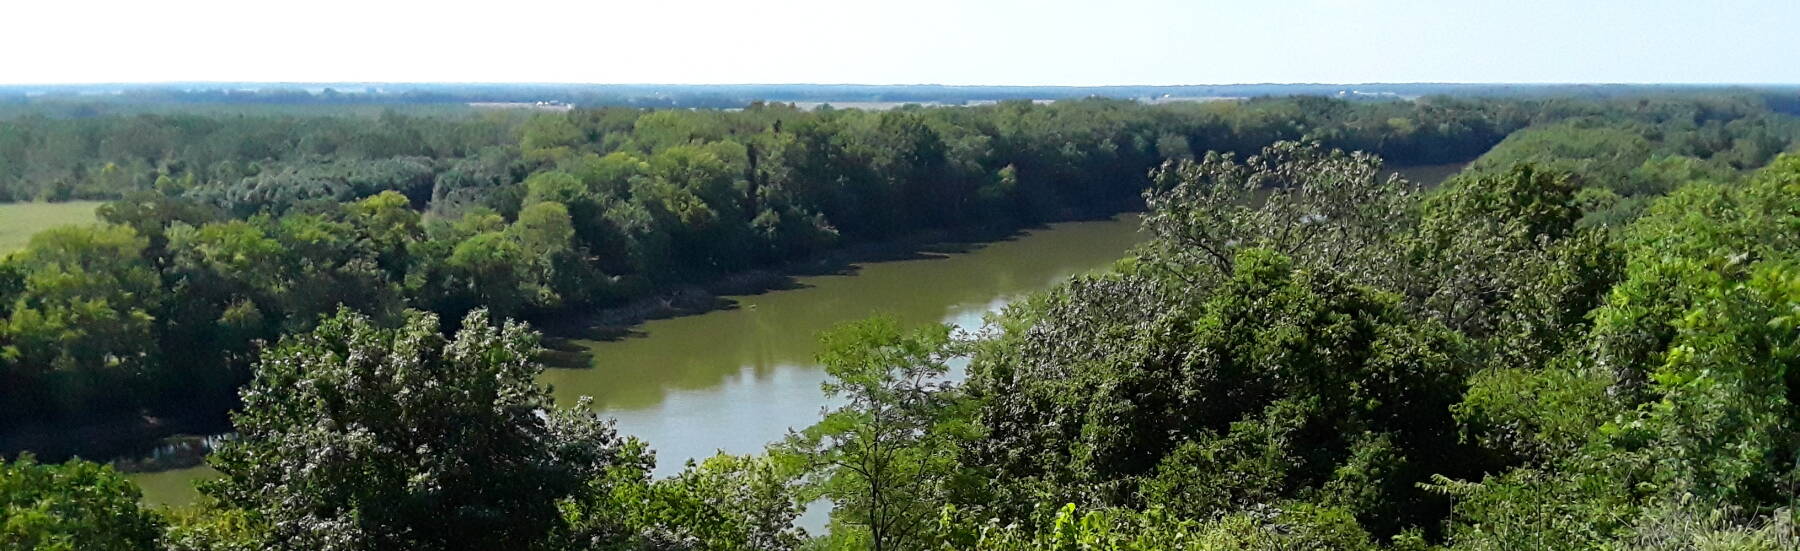 View from the Merom Bluff over the Wabash river into Illinois near the Merom Site prehistoric earthworks.